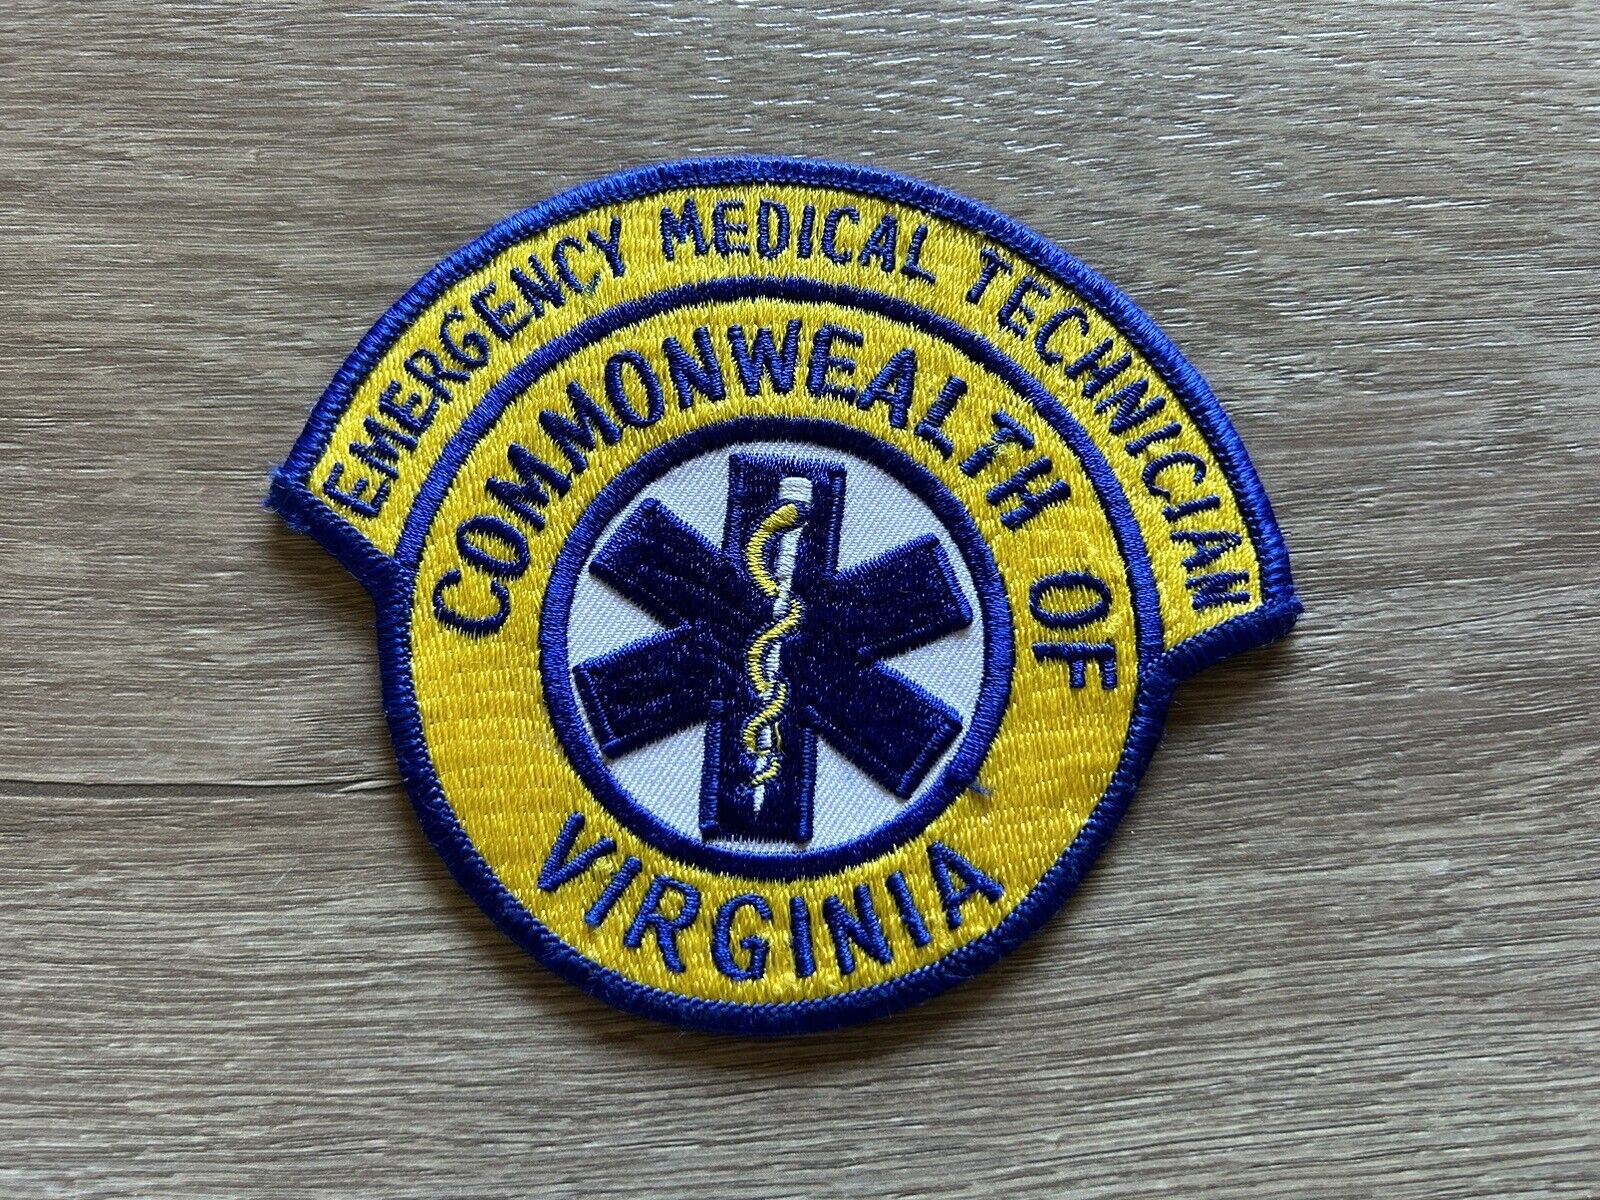 Vintage Commonwealth Of Virginia EMT Emergency Medical Technician EMS Patch